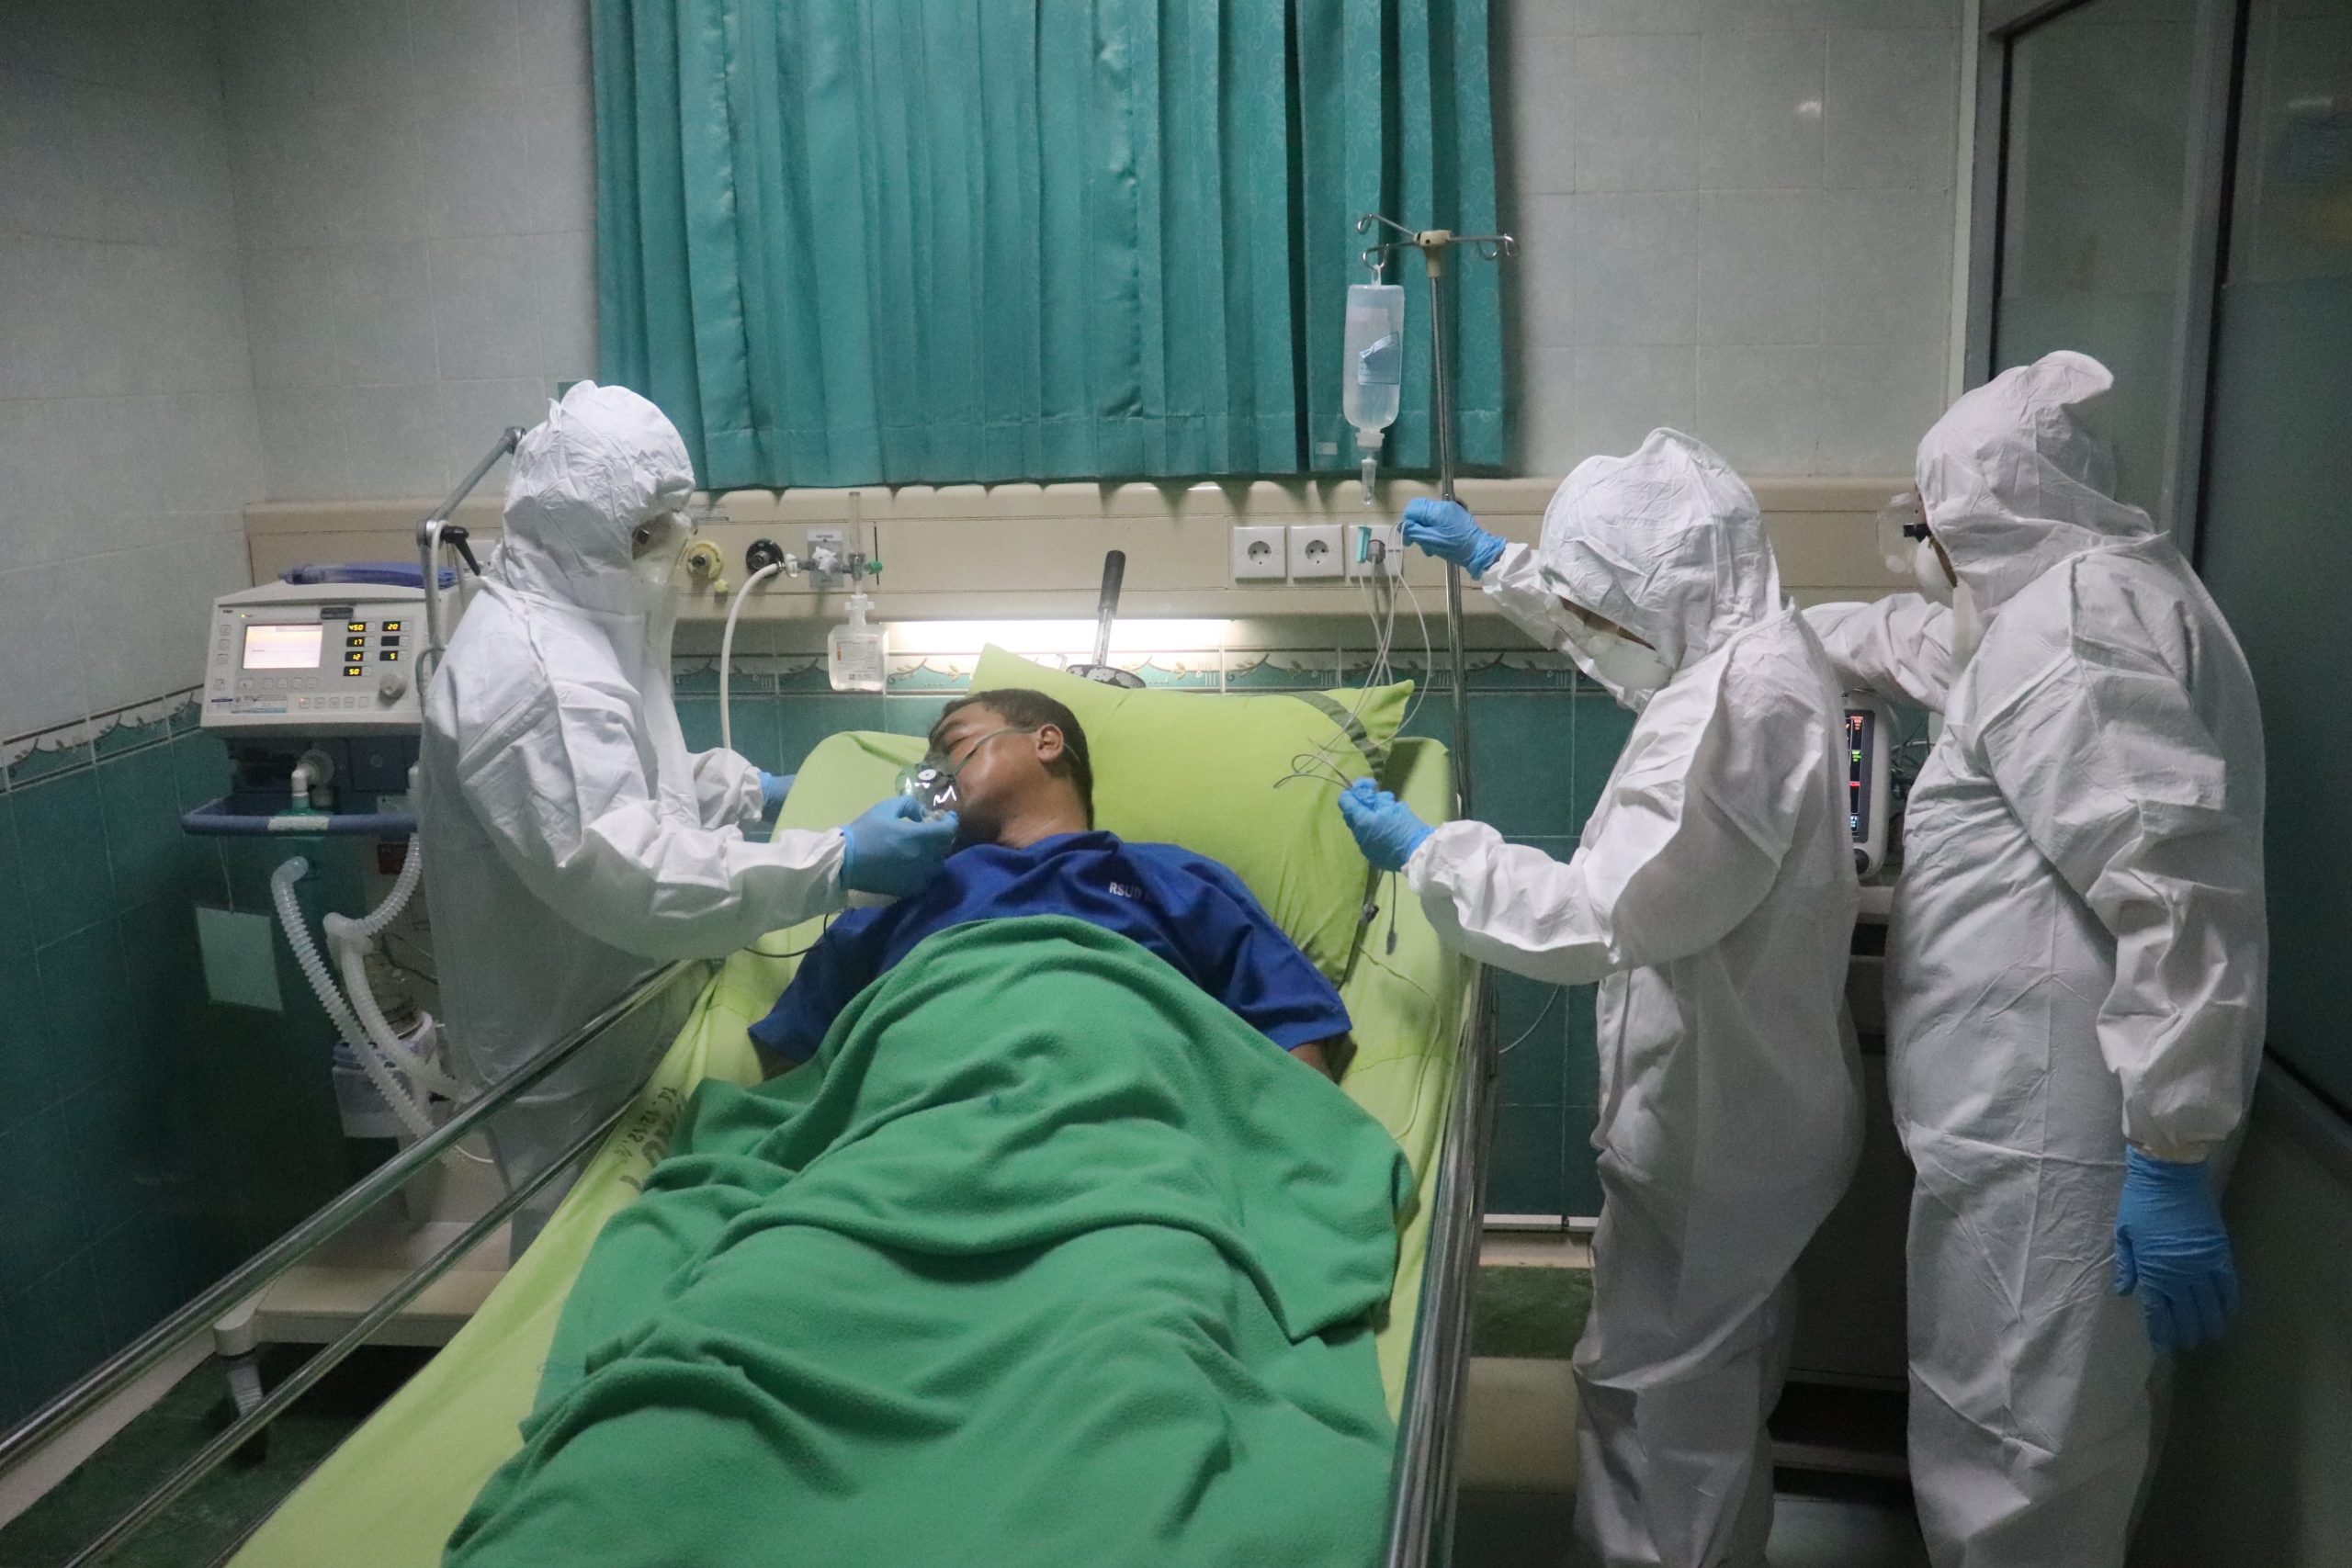 A man lies in a hospital bed surrrounded by medical workers in full protective suits.